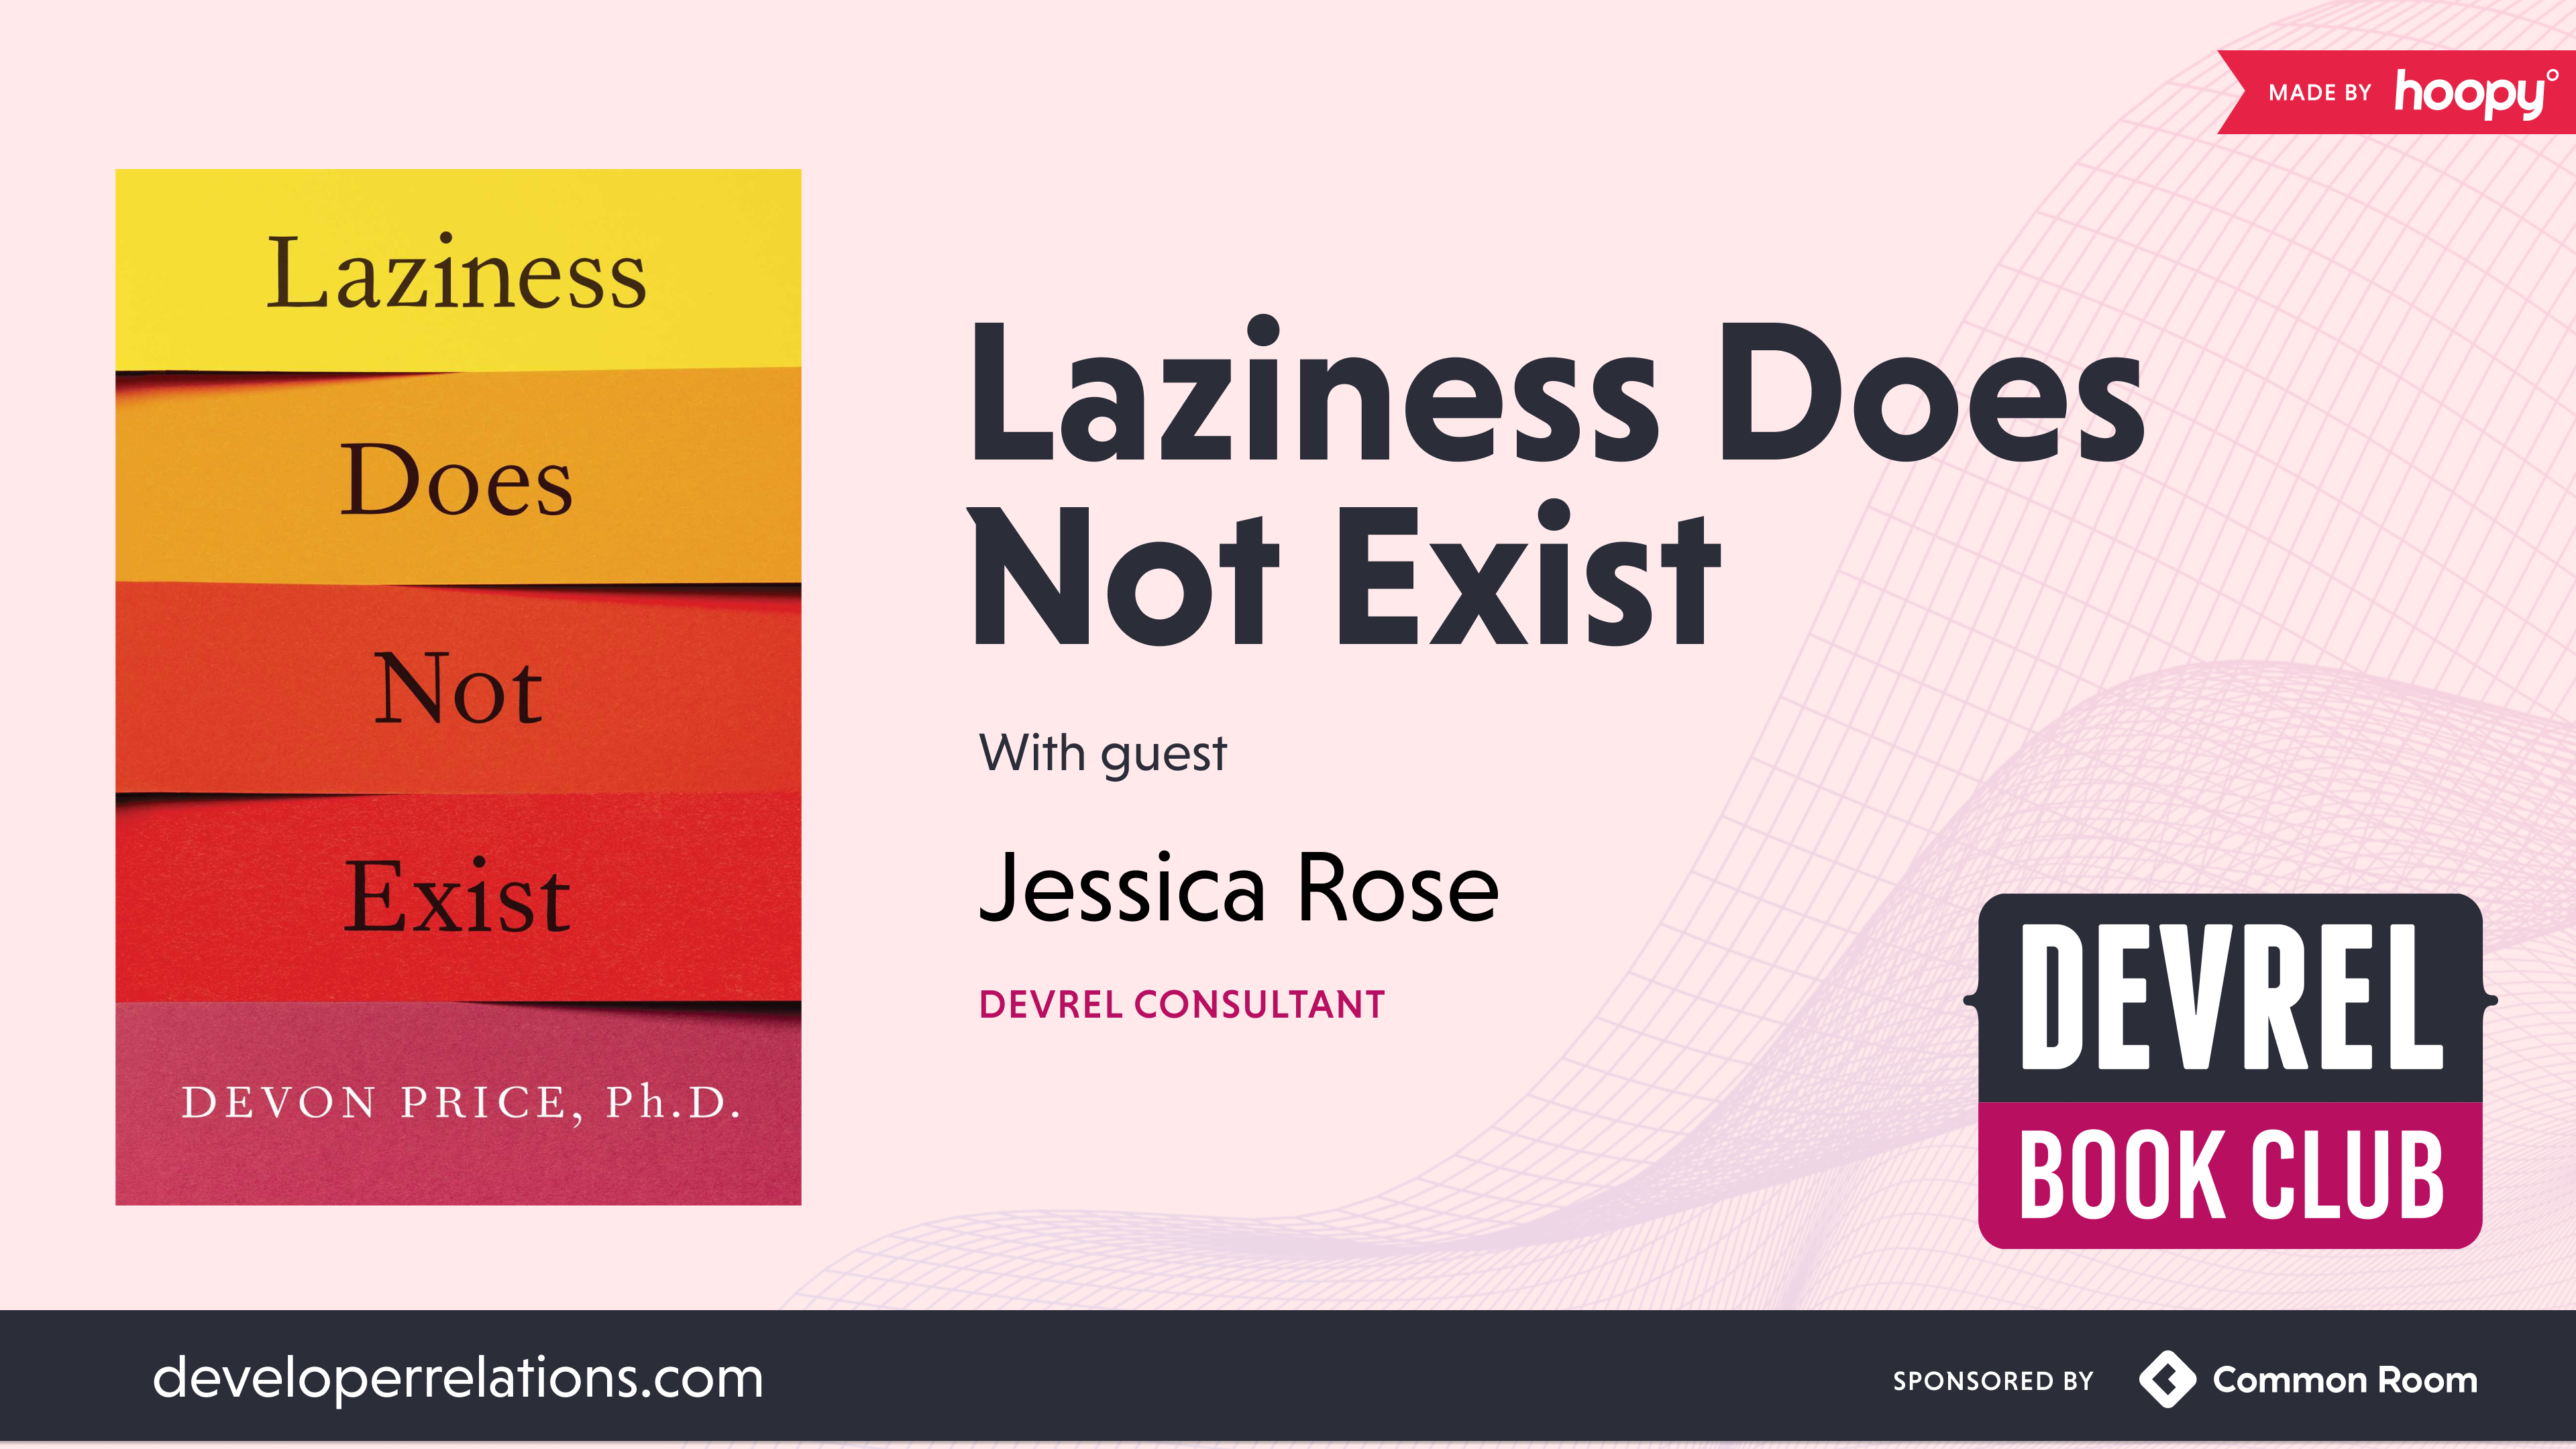 DevRel Book Club: Laziness Does not Exist with Jessica Rose